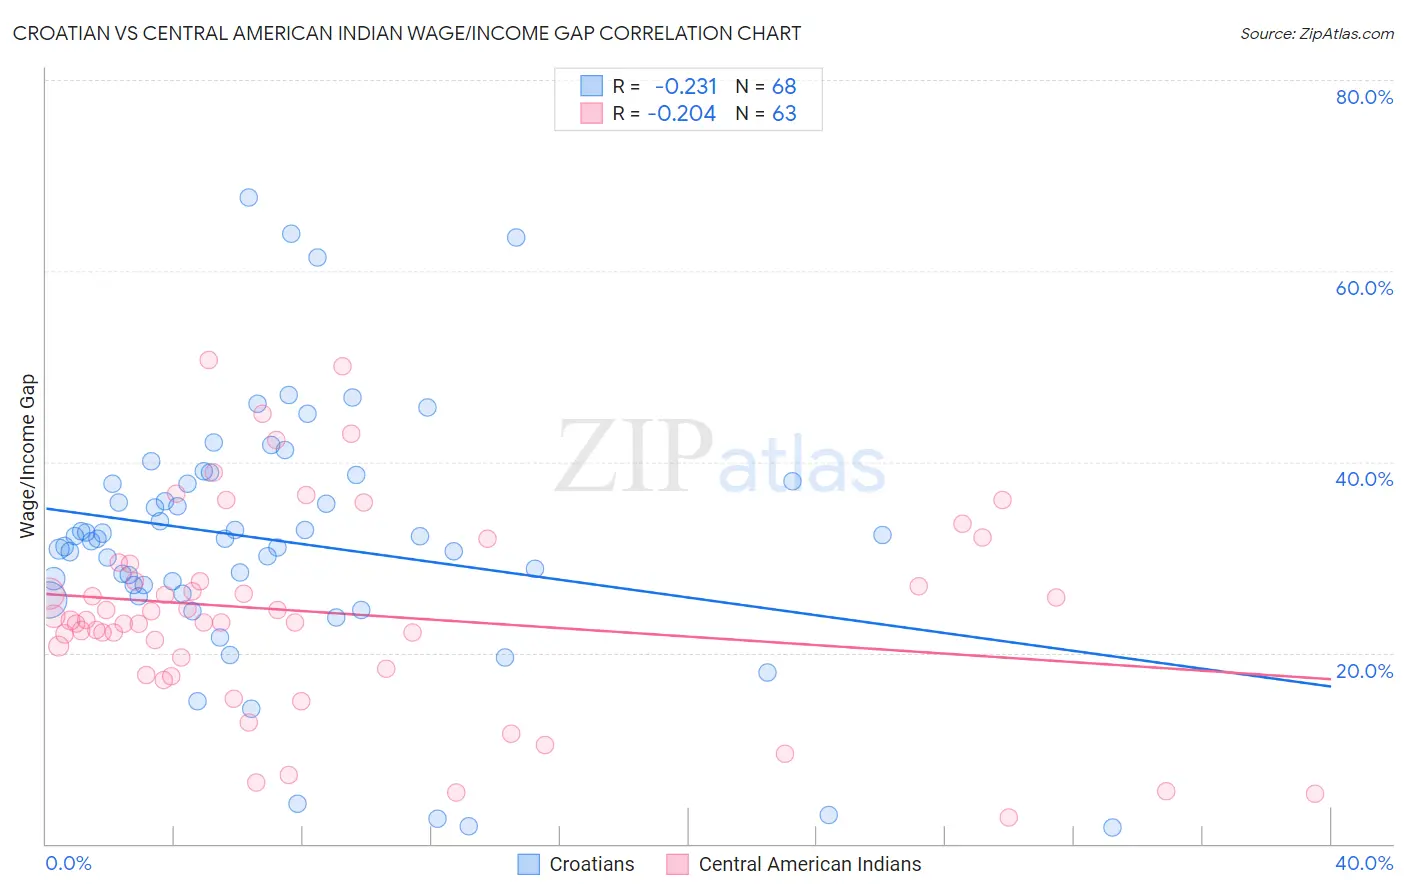 Croatian vs Central American Indian Wage/Income Gap